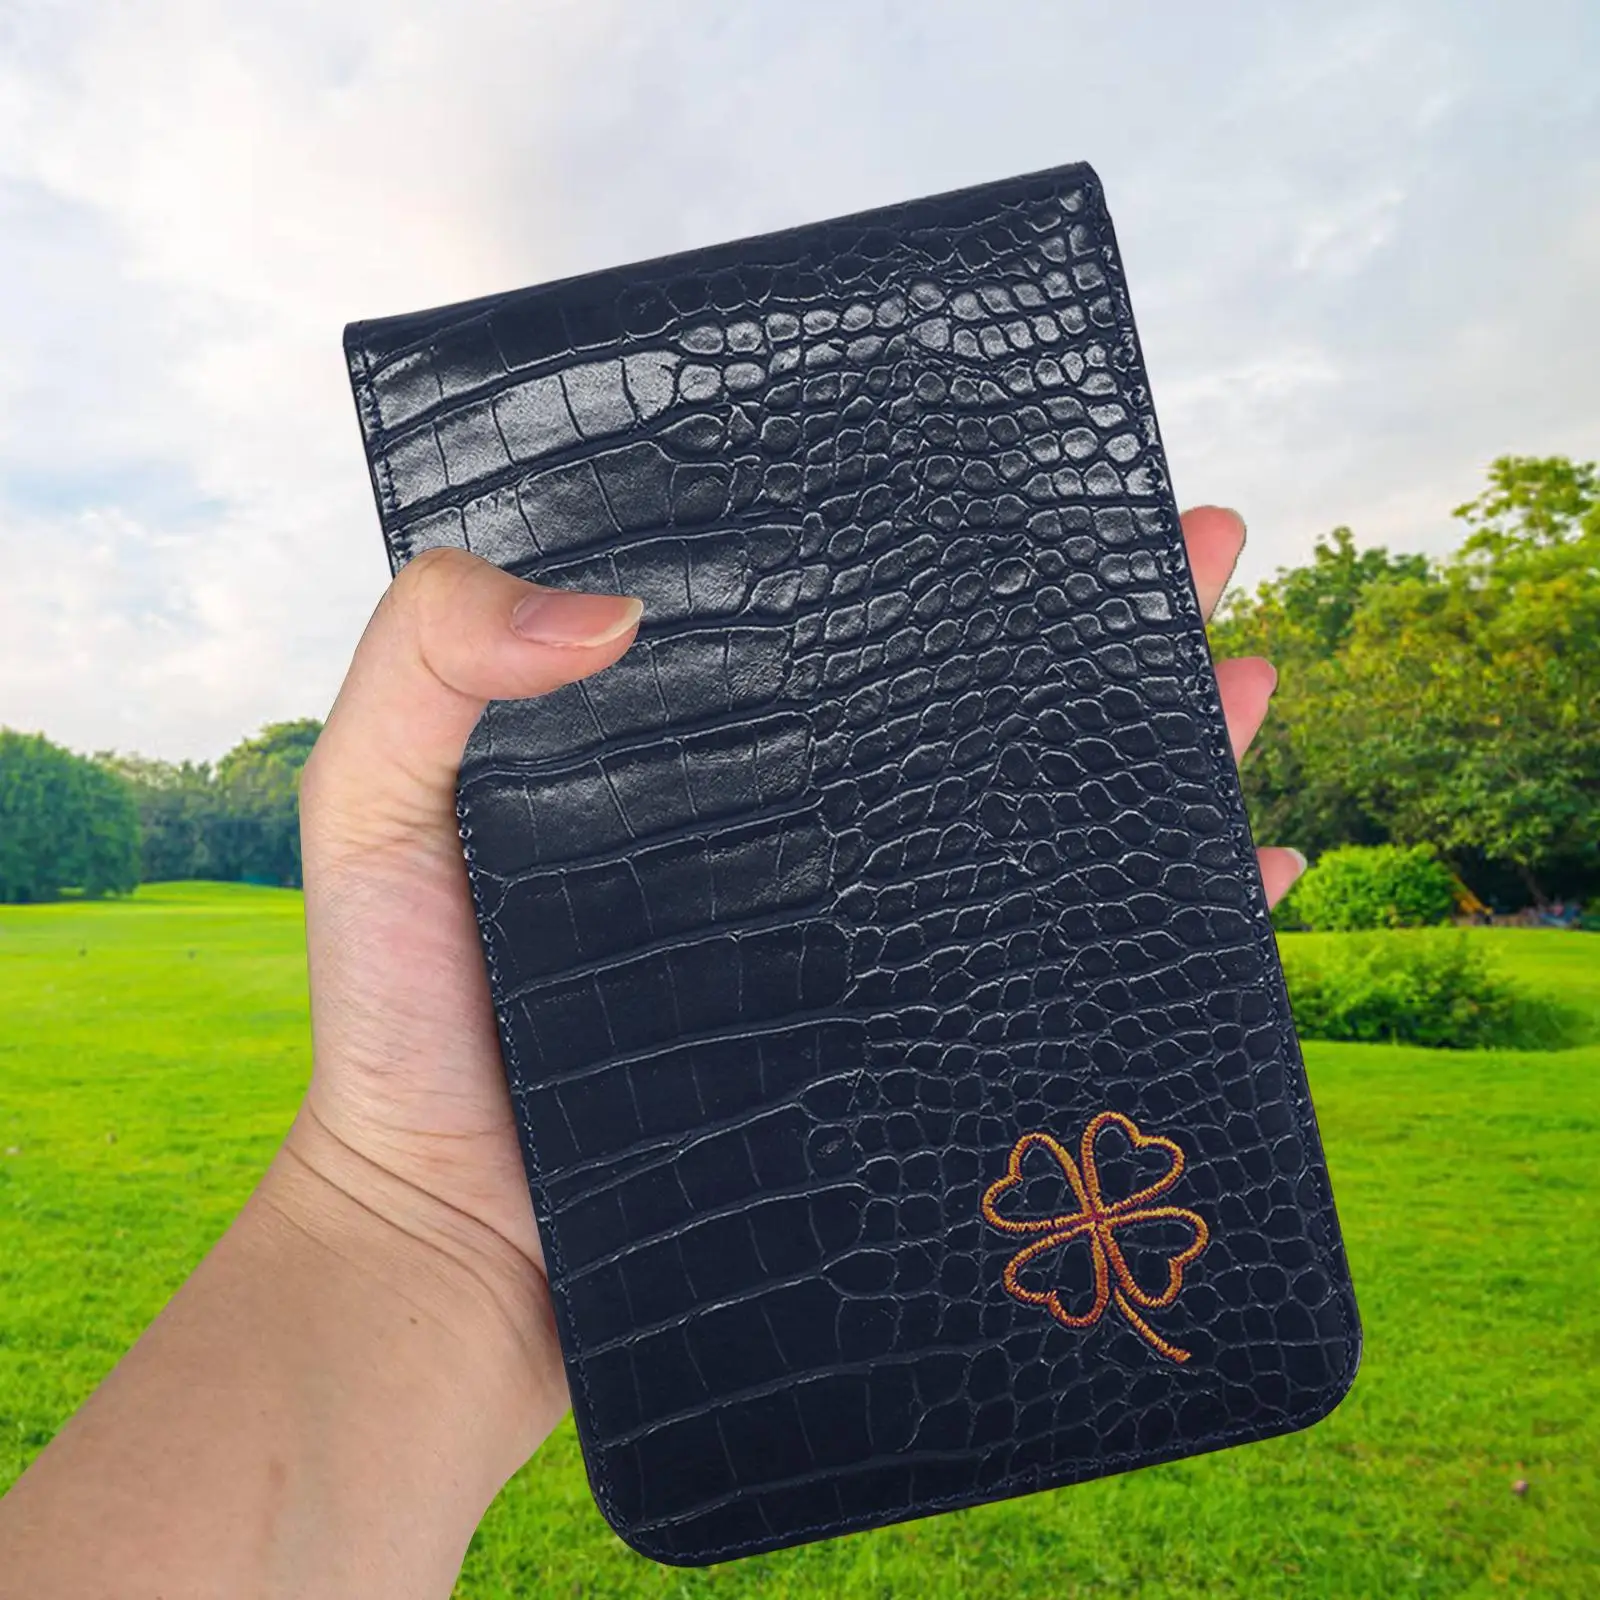 Yardage Book Cover Golf Score Cards Wallet with Pencil Loop with Elastic Bands Golf Scorecard Holder for Golfer Family Birthday